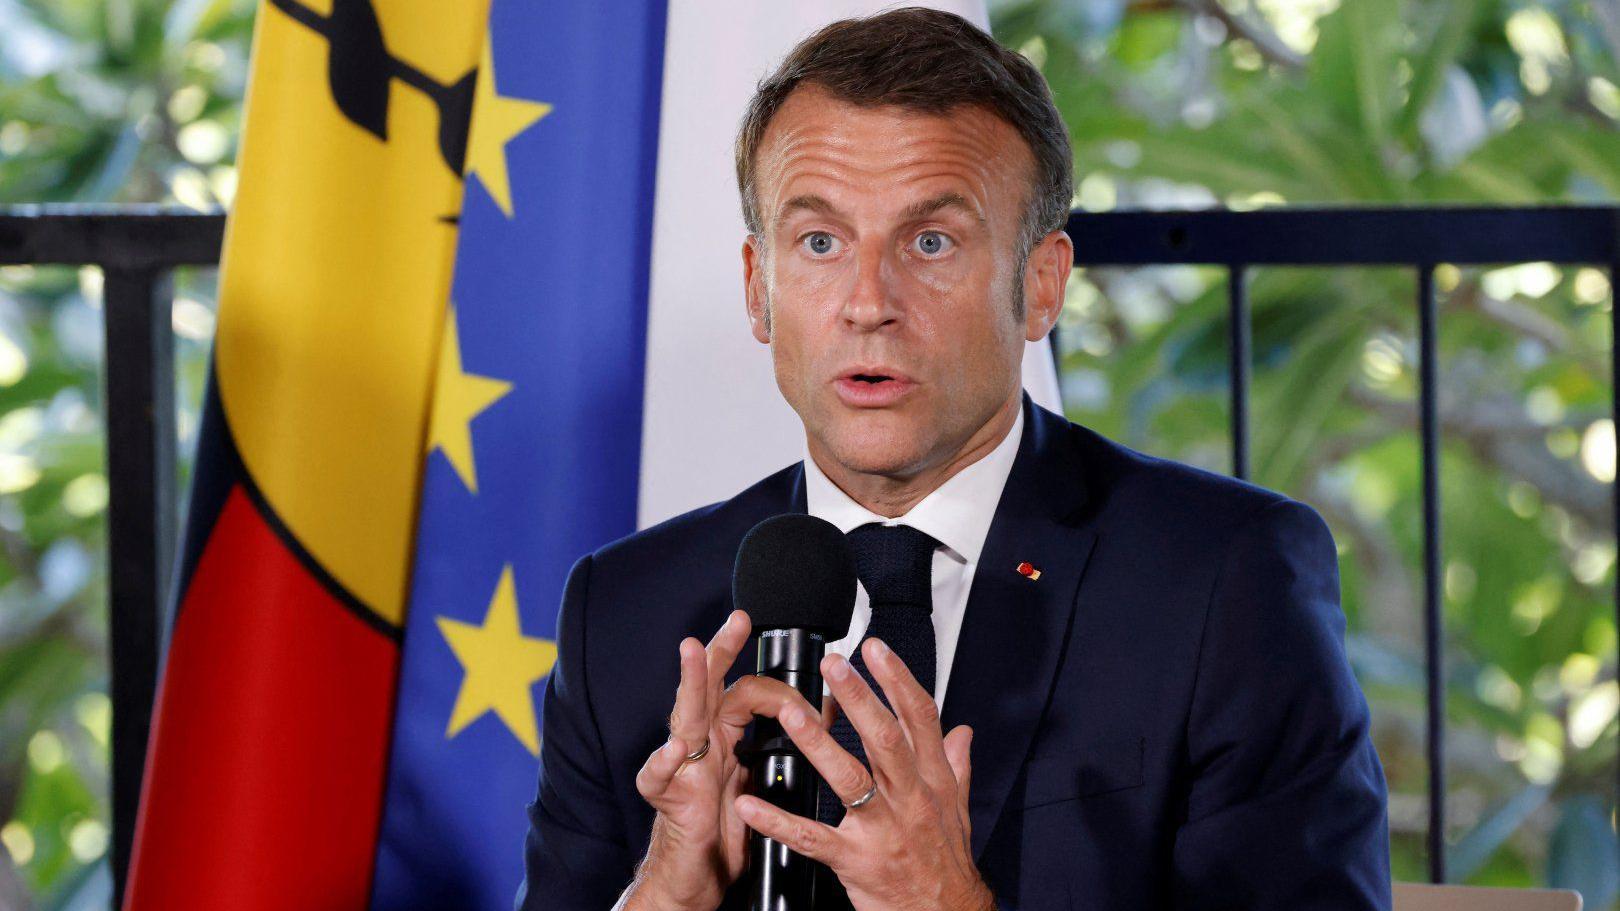 Extra French police to stay in New Caledonia, Macron says